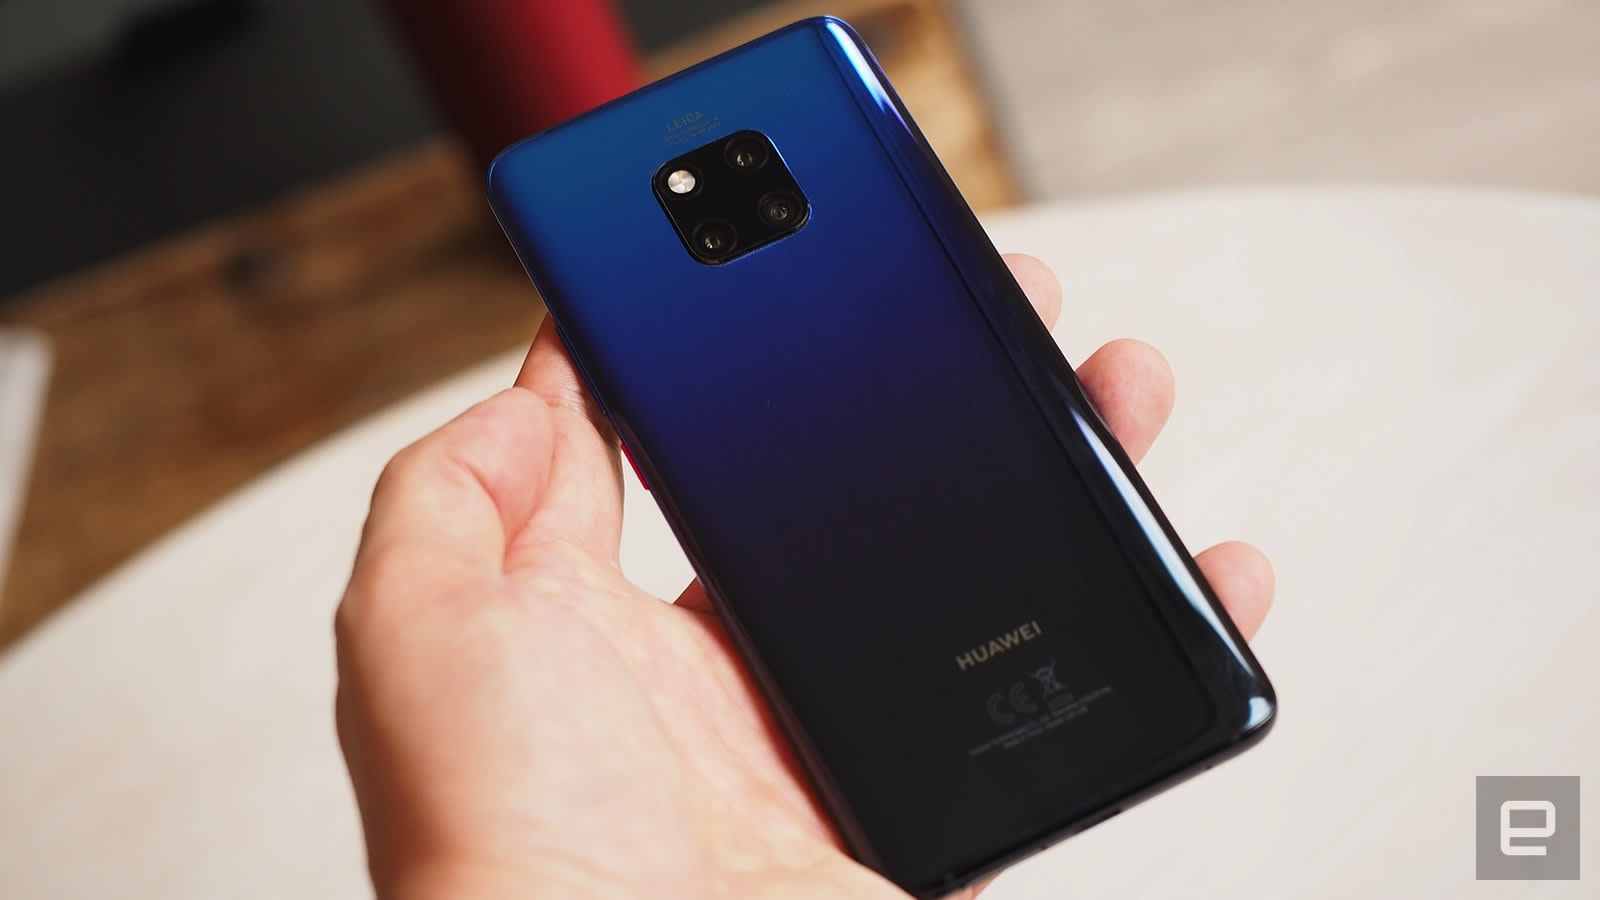 Huawei Ships Record 200 Million Phones In 2018 Despite